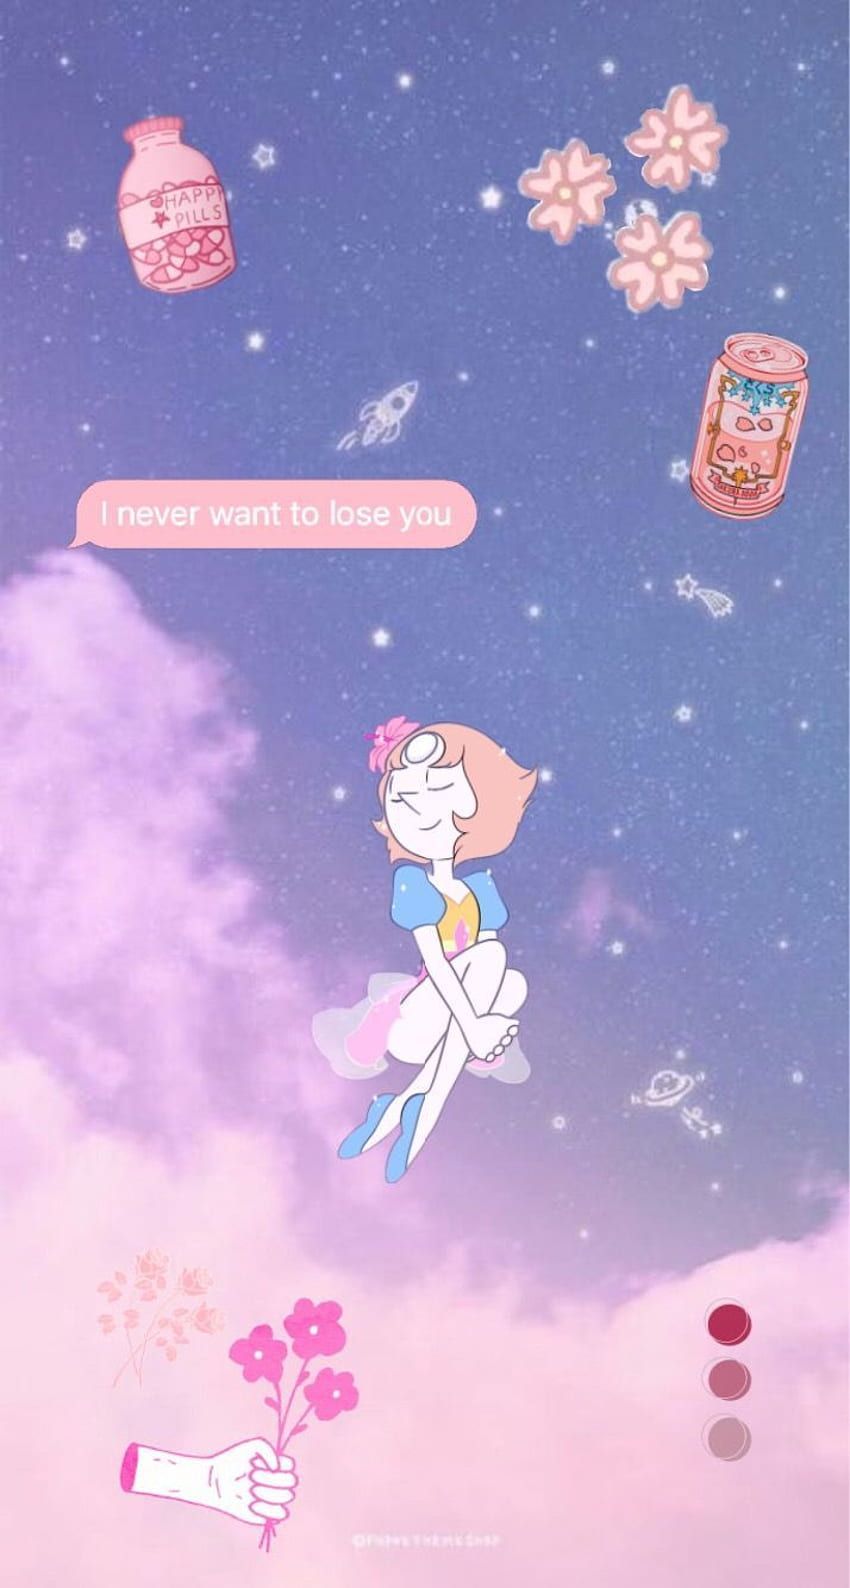 A cute girl in the sky with flowers and other objects - Steven Universe